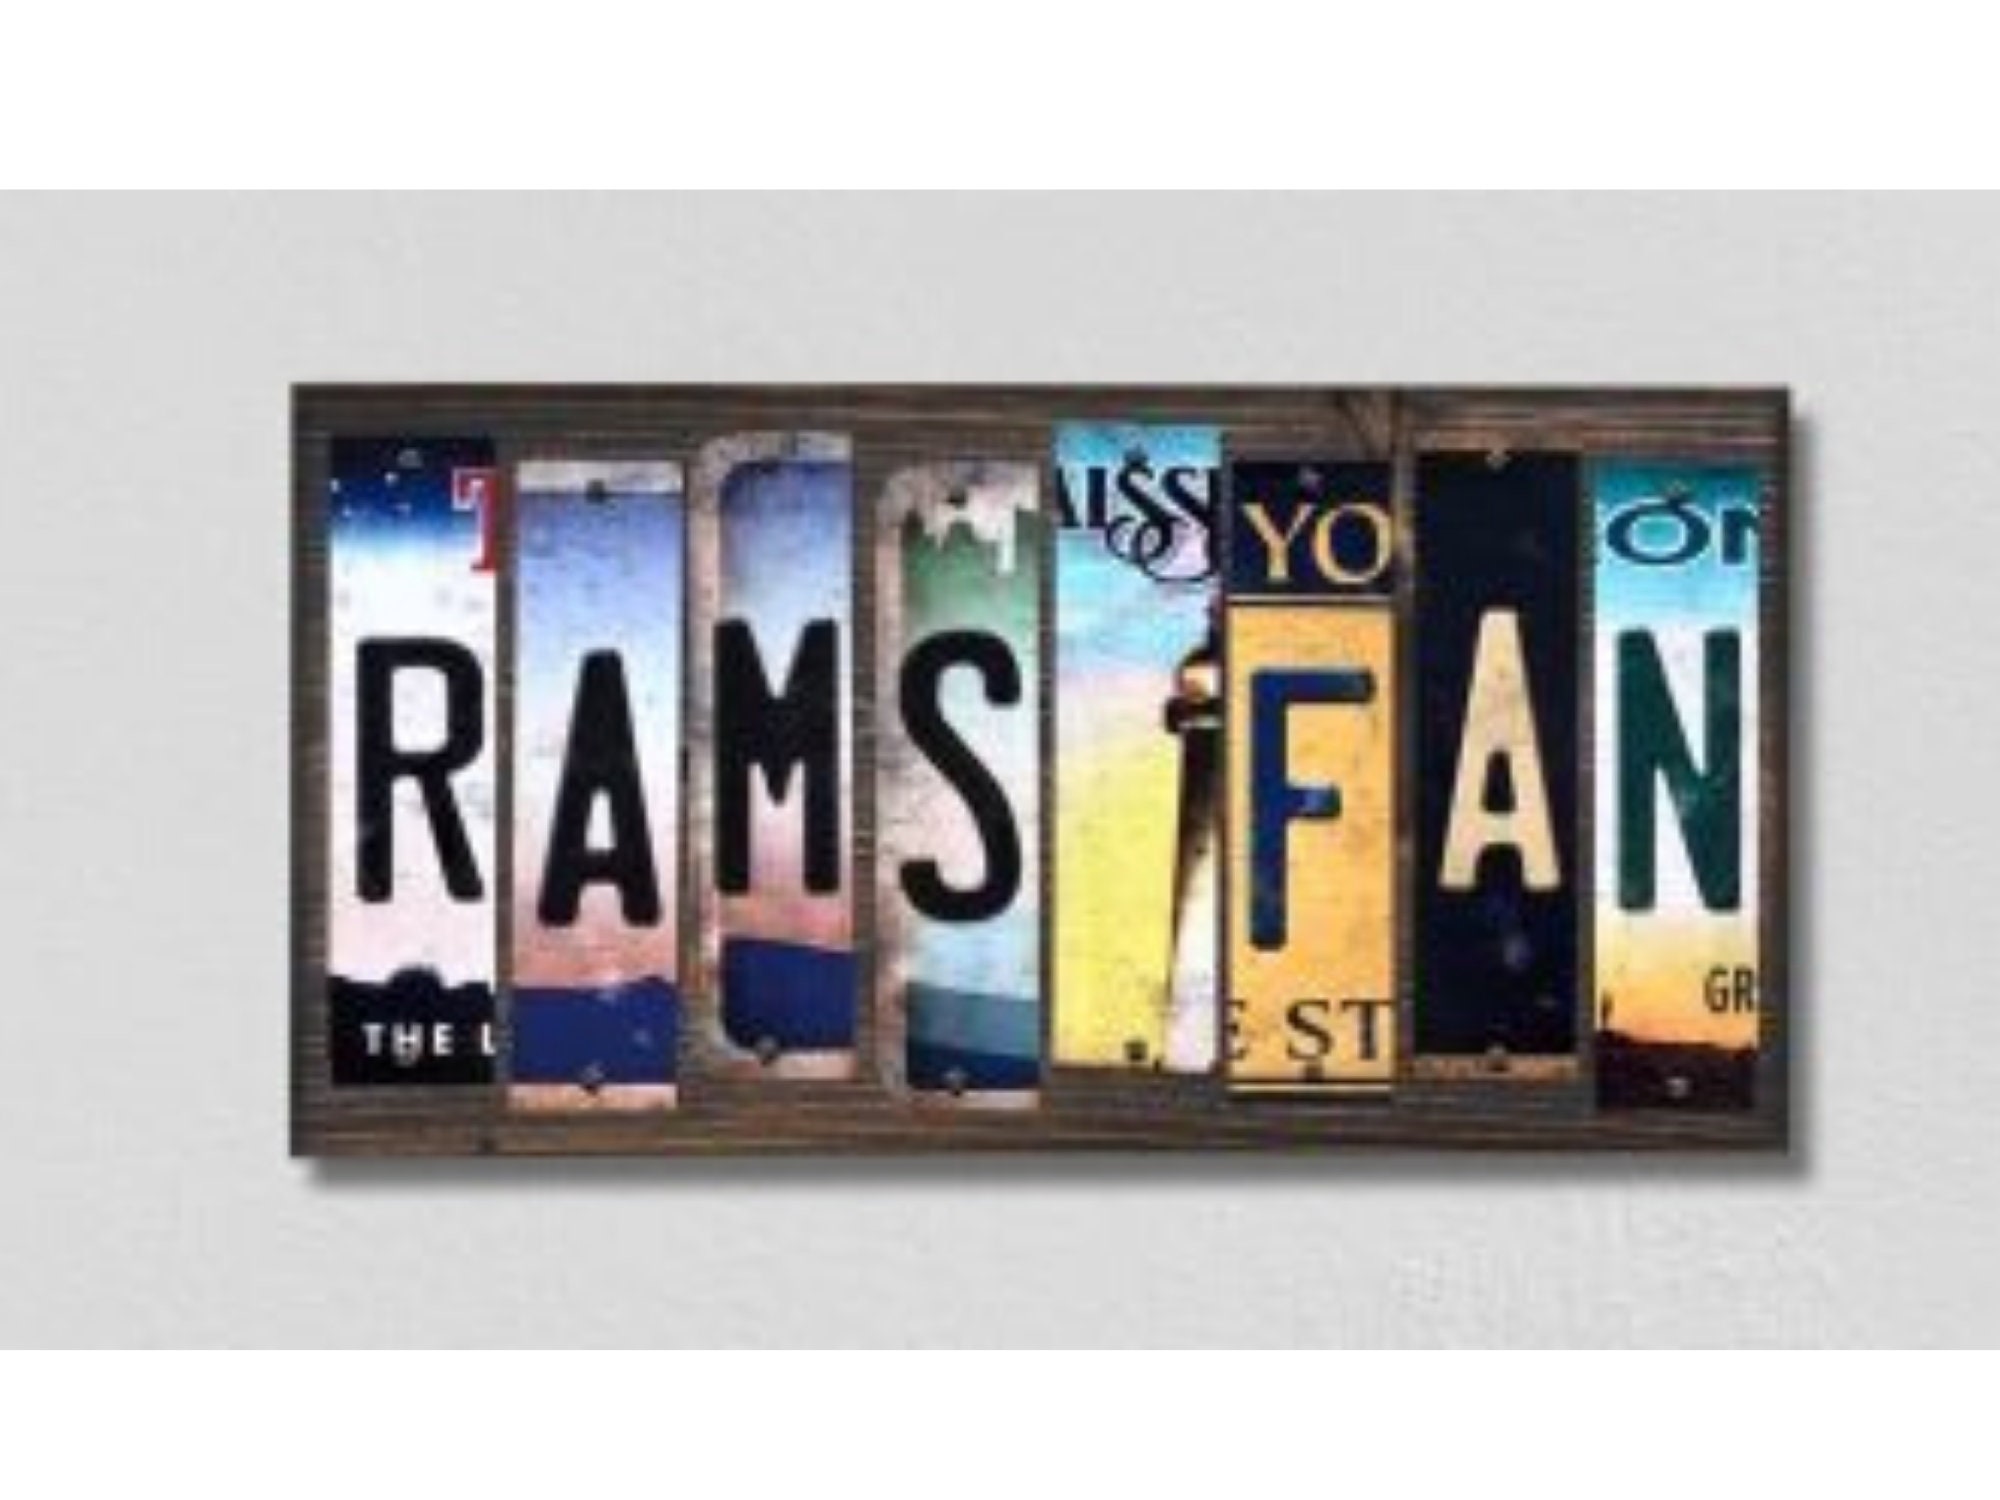 Los Angeles Rams Fan Handmade Wood Sign With Metal License Plate Strips Personalized Football , Custom Team Name Sign, State Farm